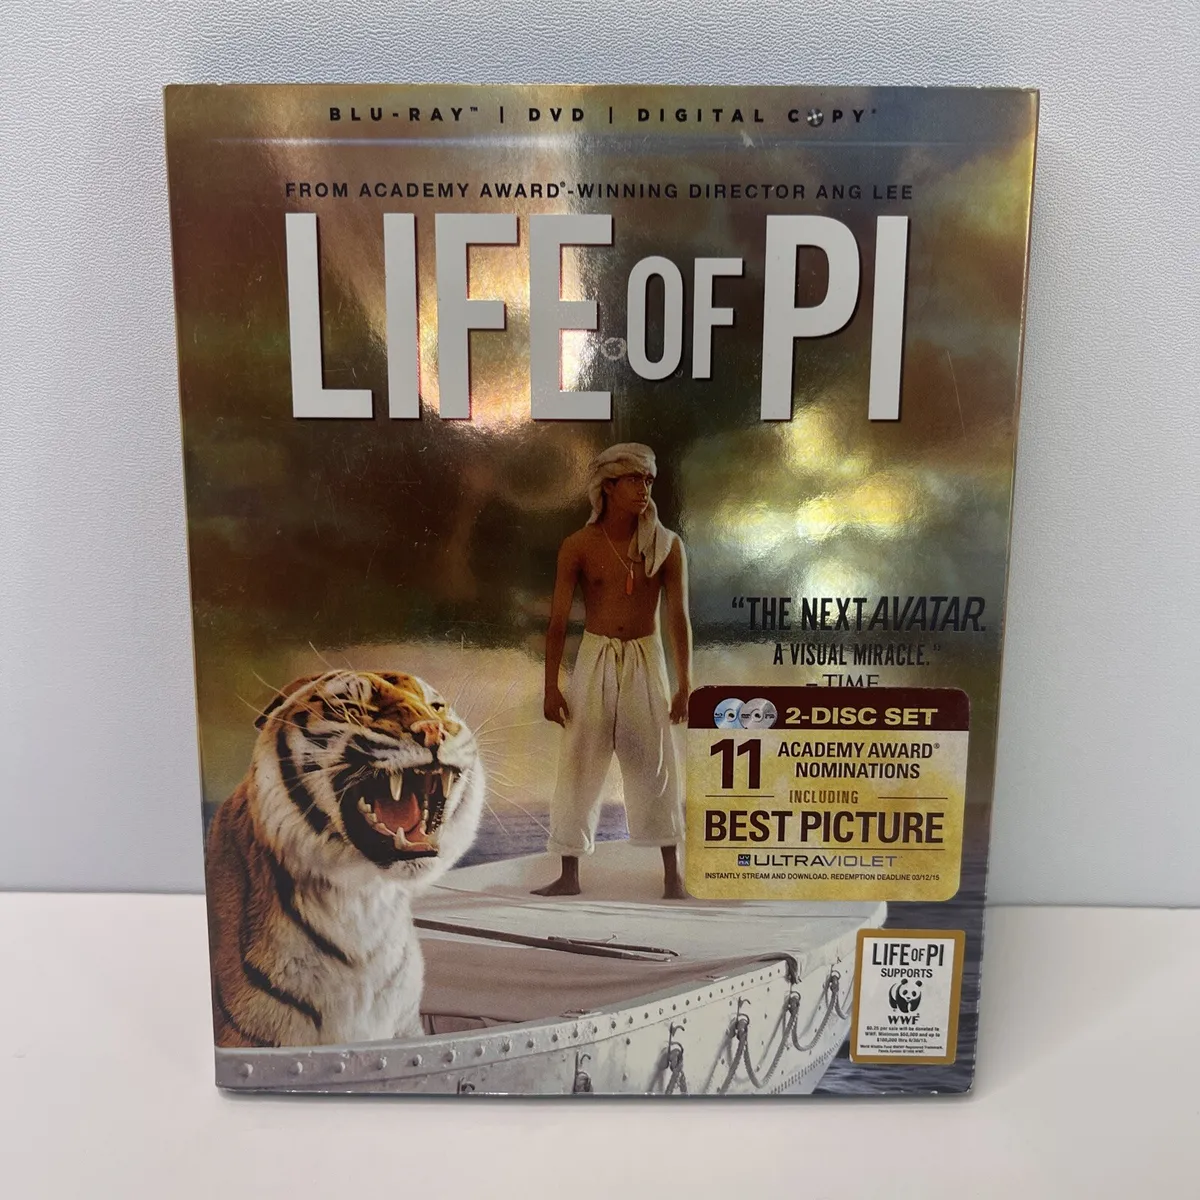 anar agayev recommends life of pi full movie download pic